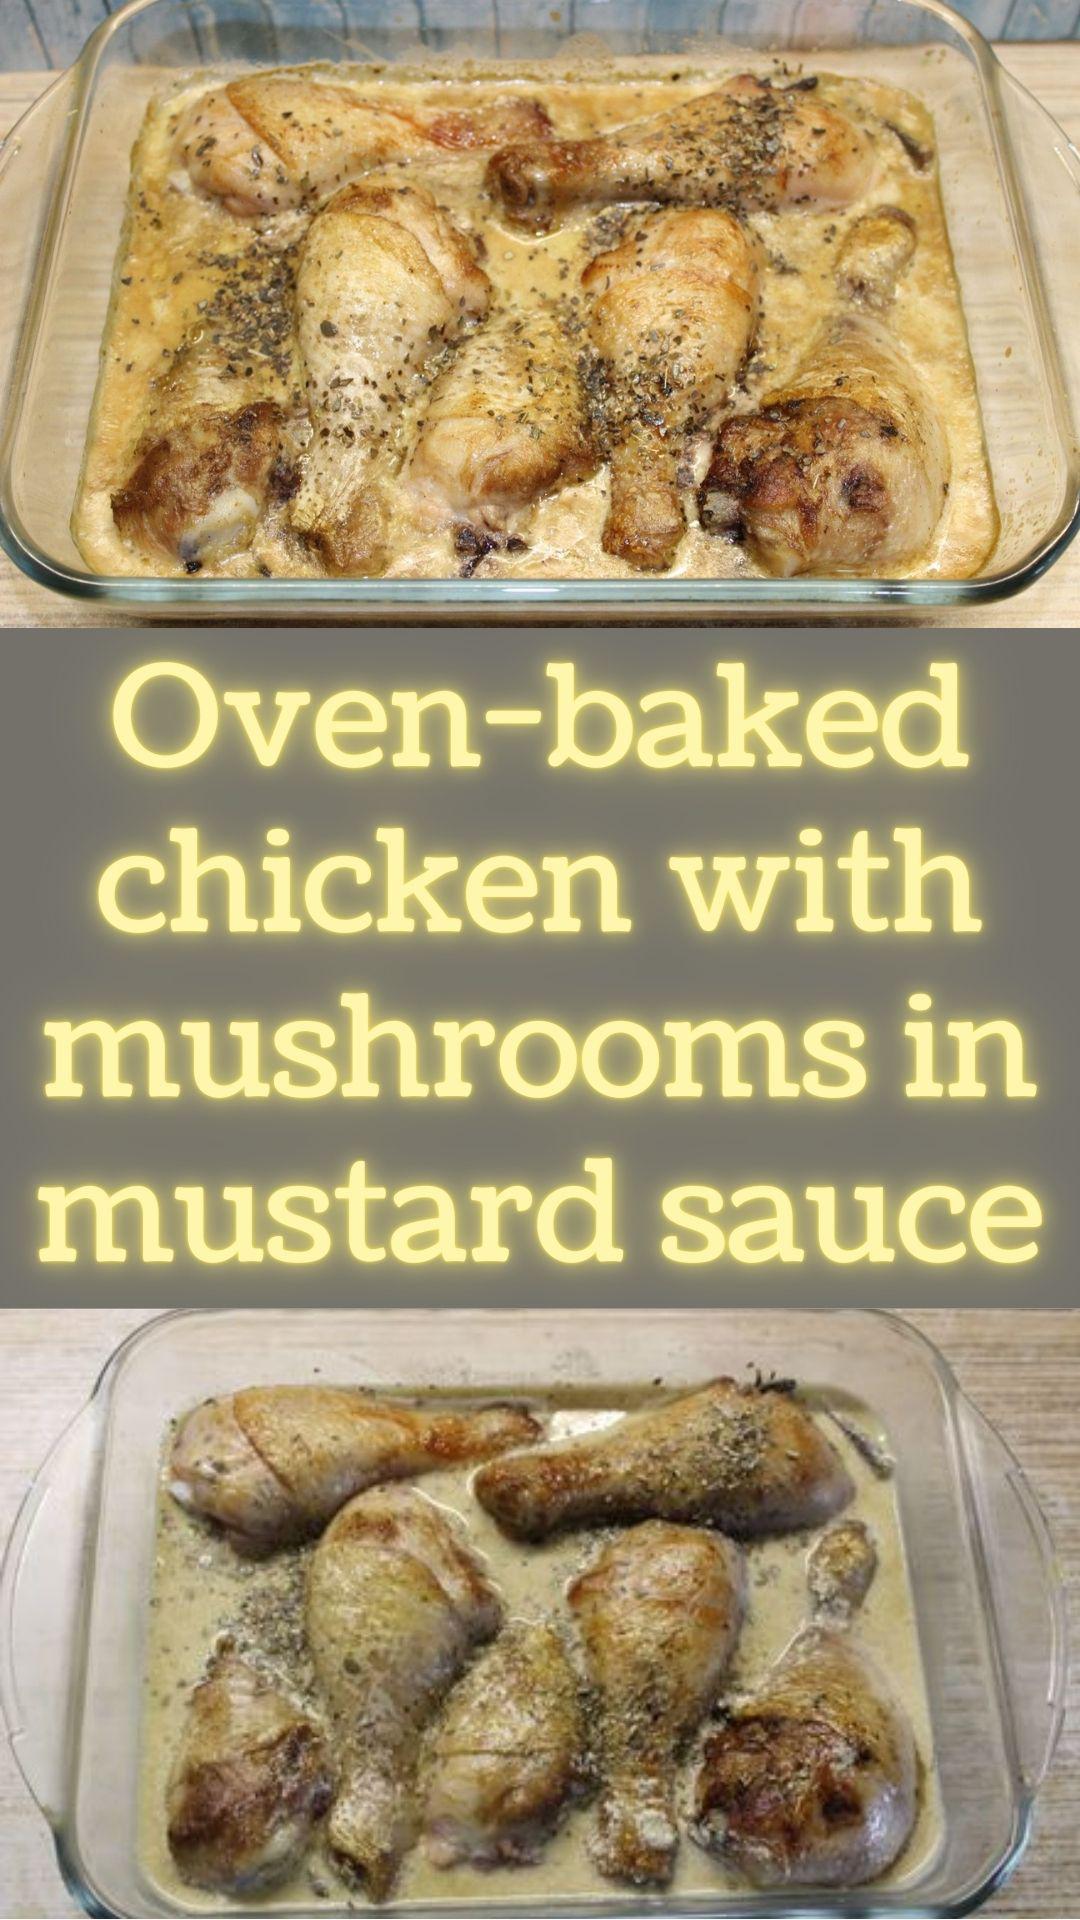 Oven-baked chicken with mushrooms in mustard sauce